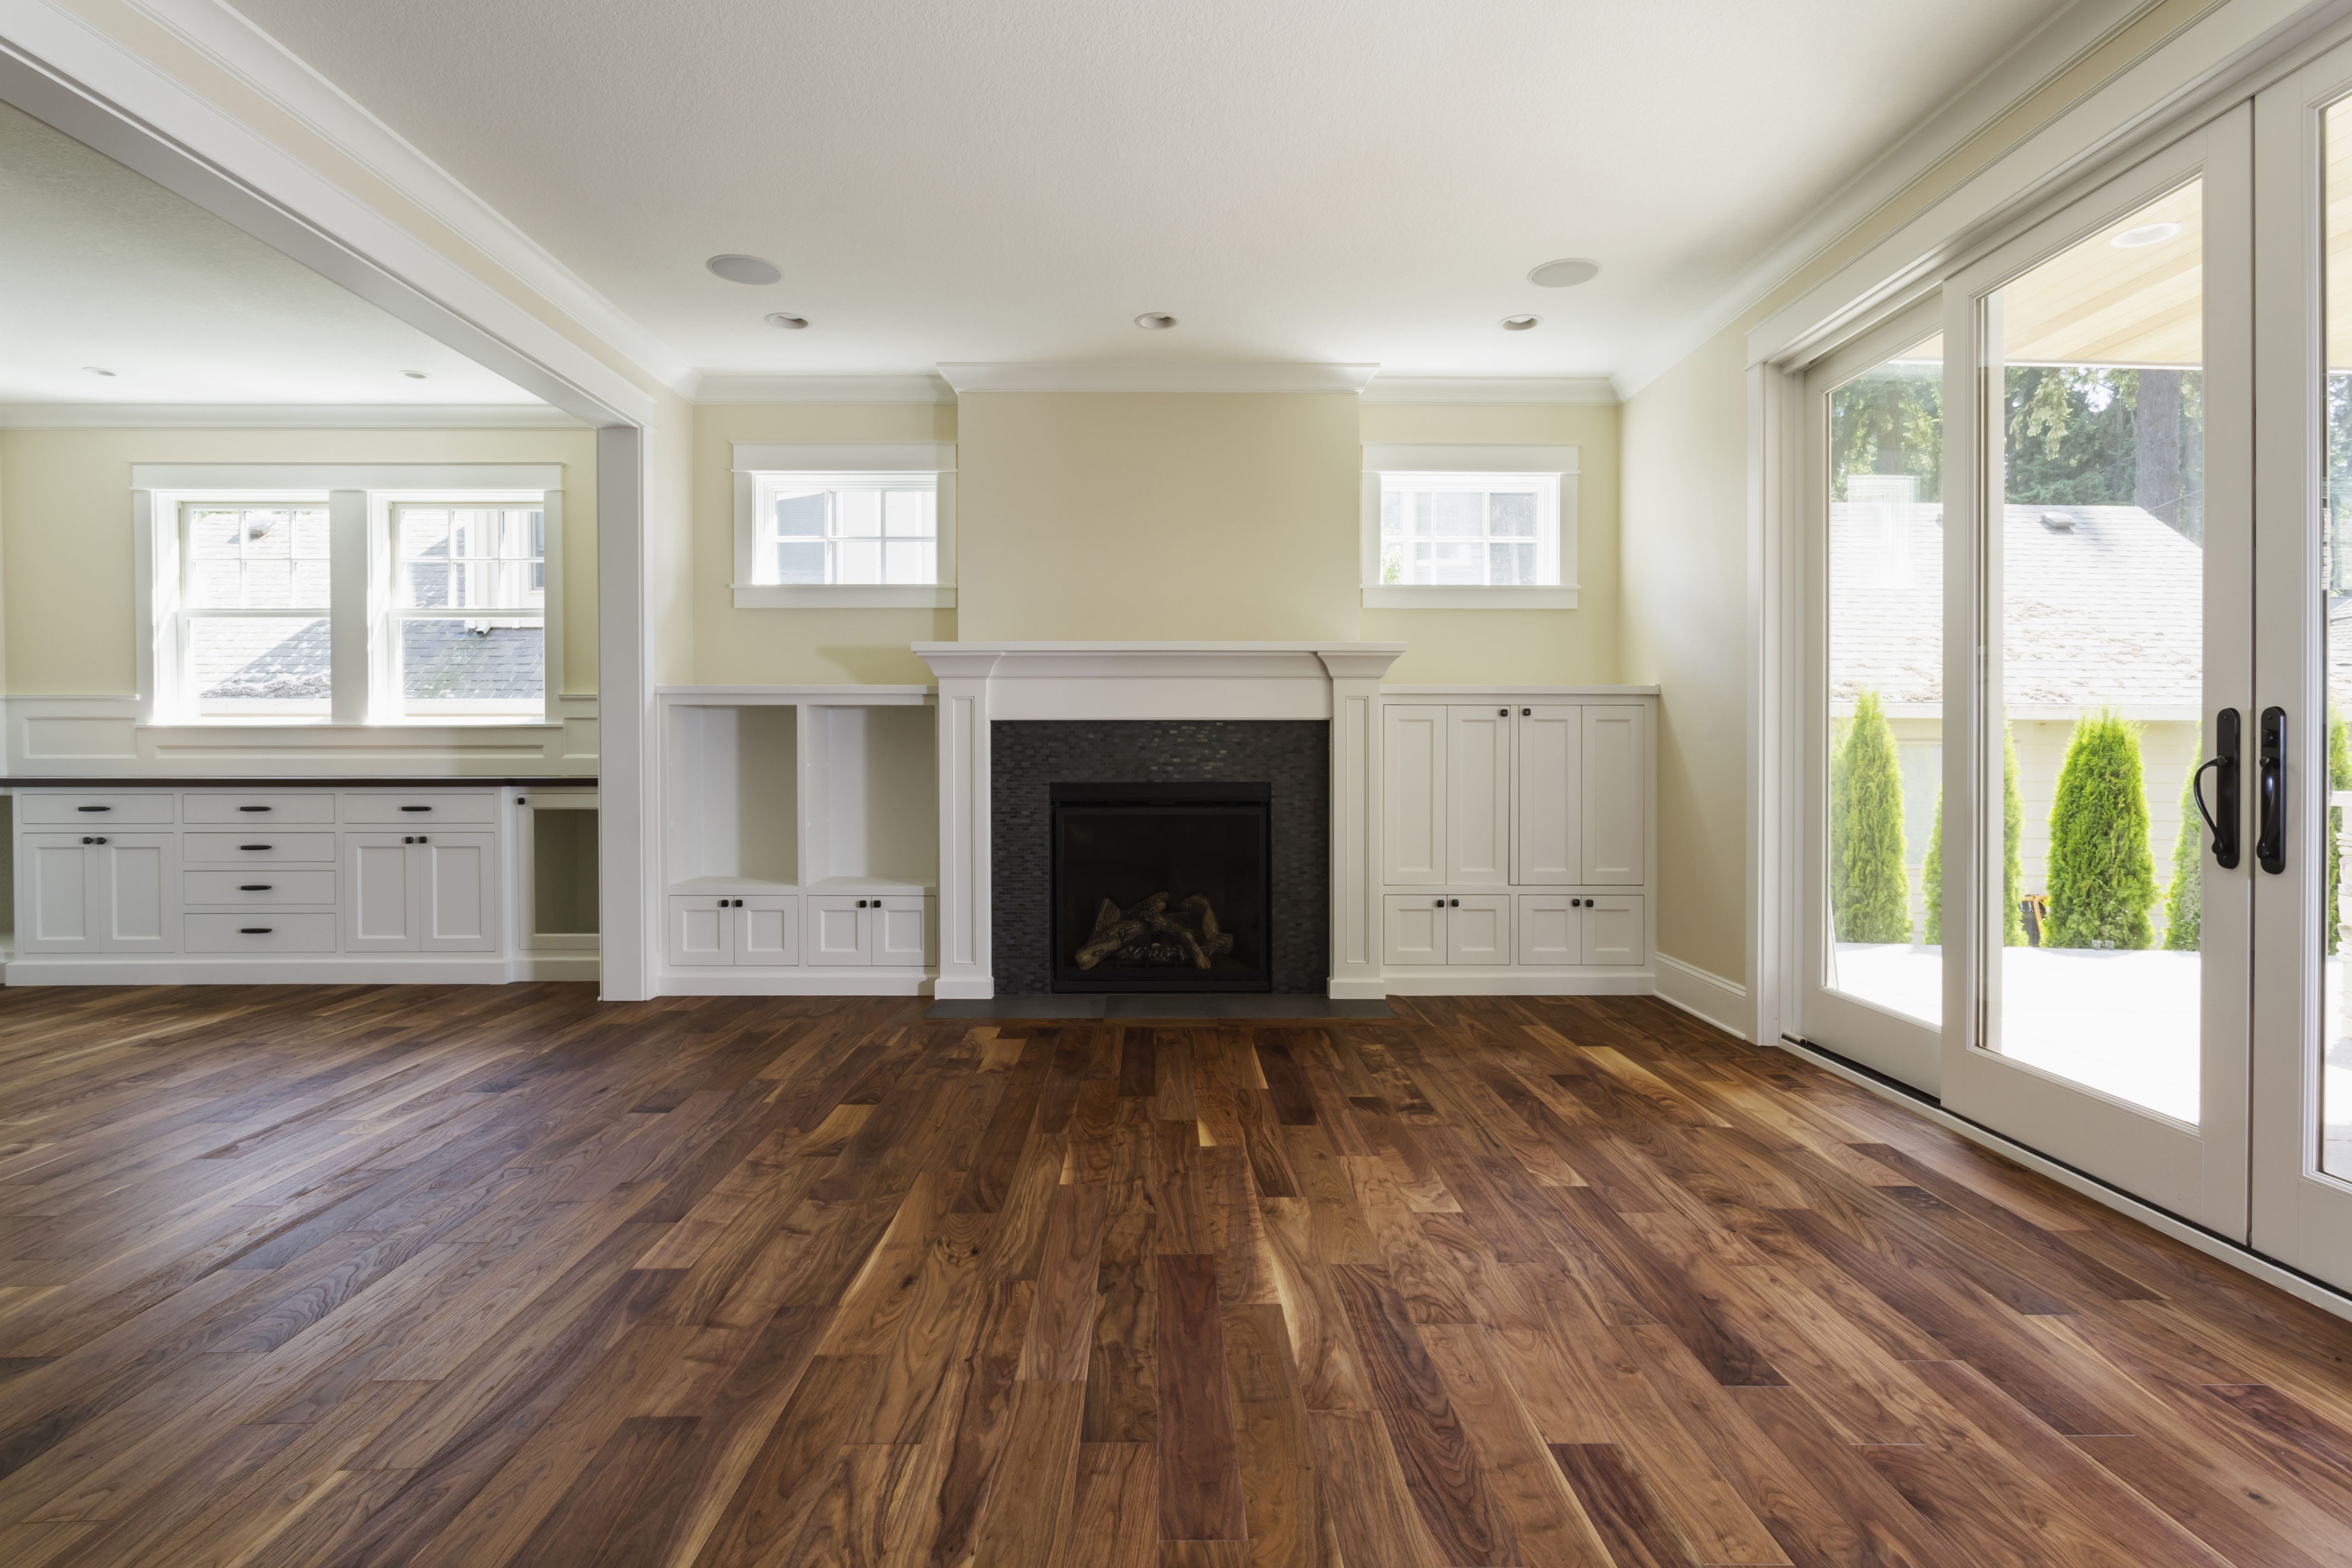 13 Cute Different Types Of Hardwood Floors 2024 free download different types of hardwood floors of the pros and cons of prefinished hardwood flooring in fireplace and built in shelves in living room 482143011 57bef8e33df78cc16e035397